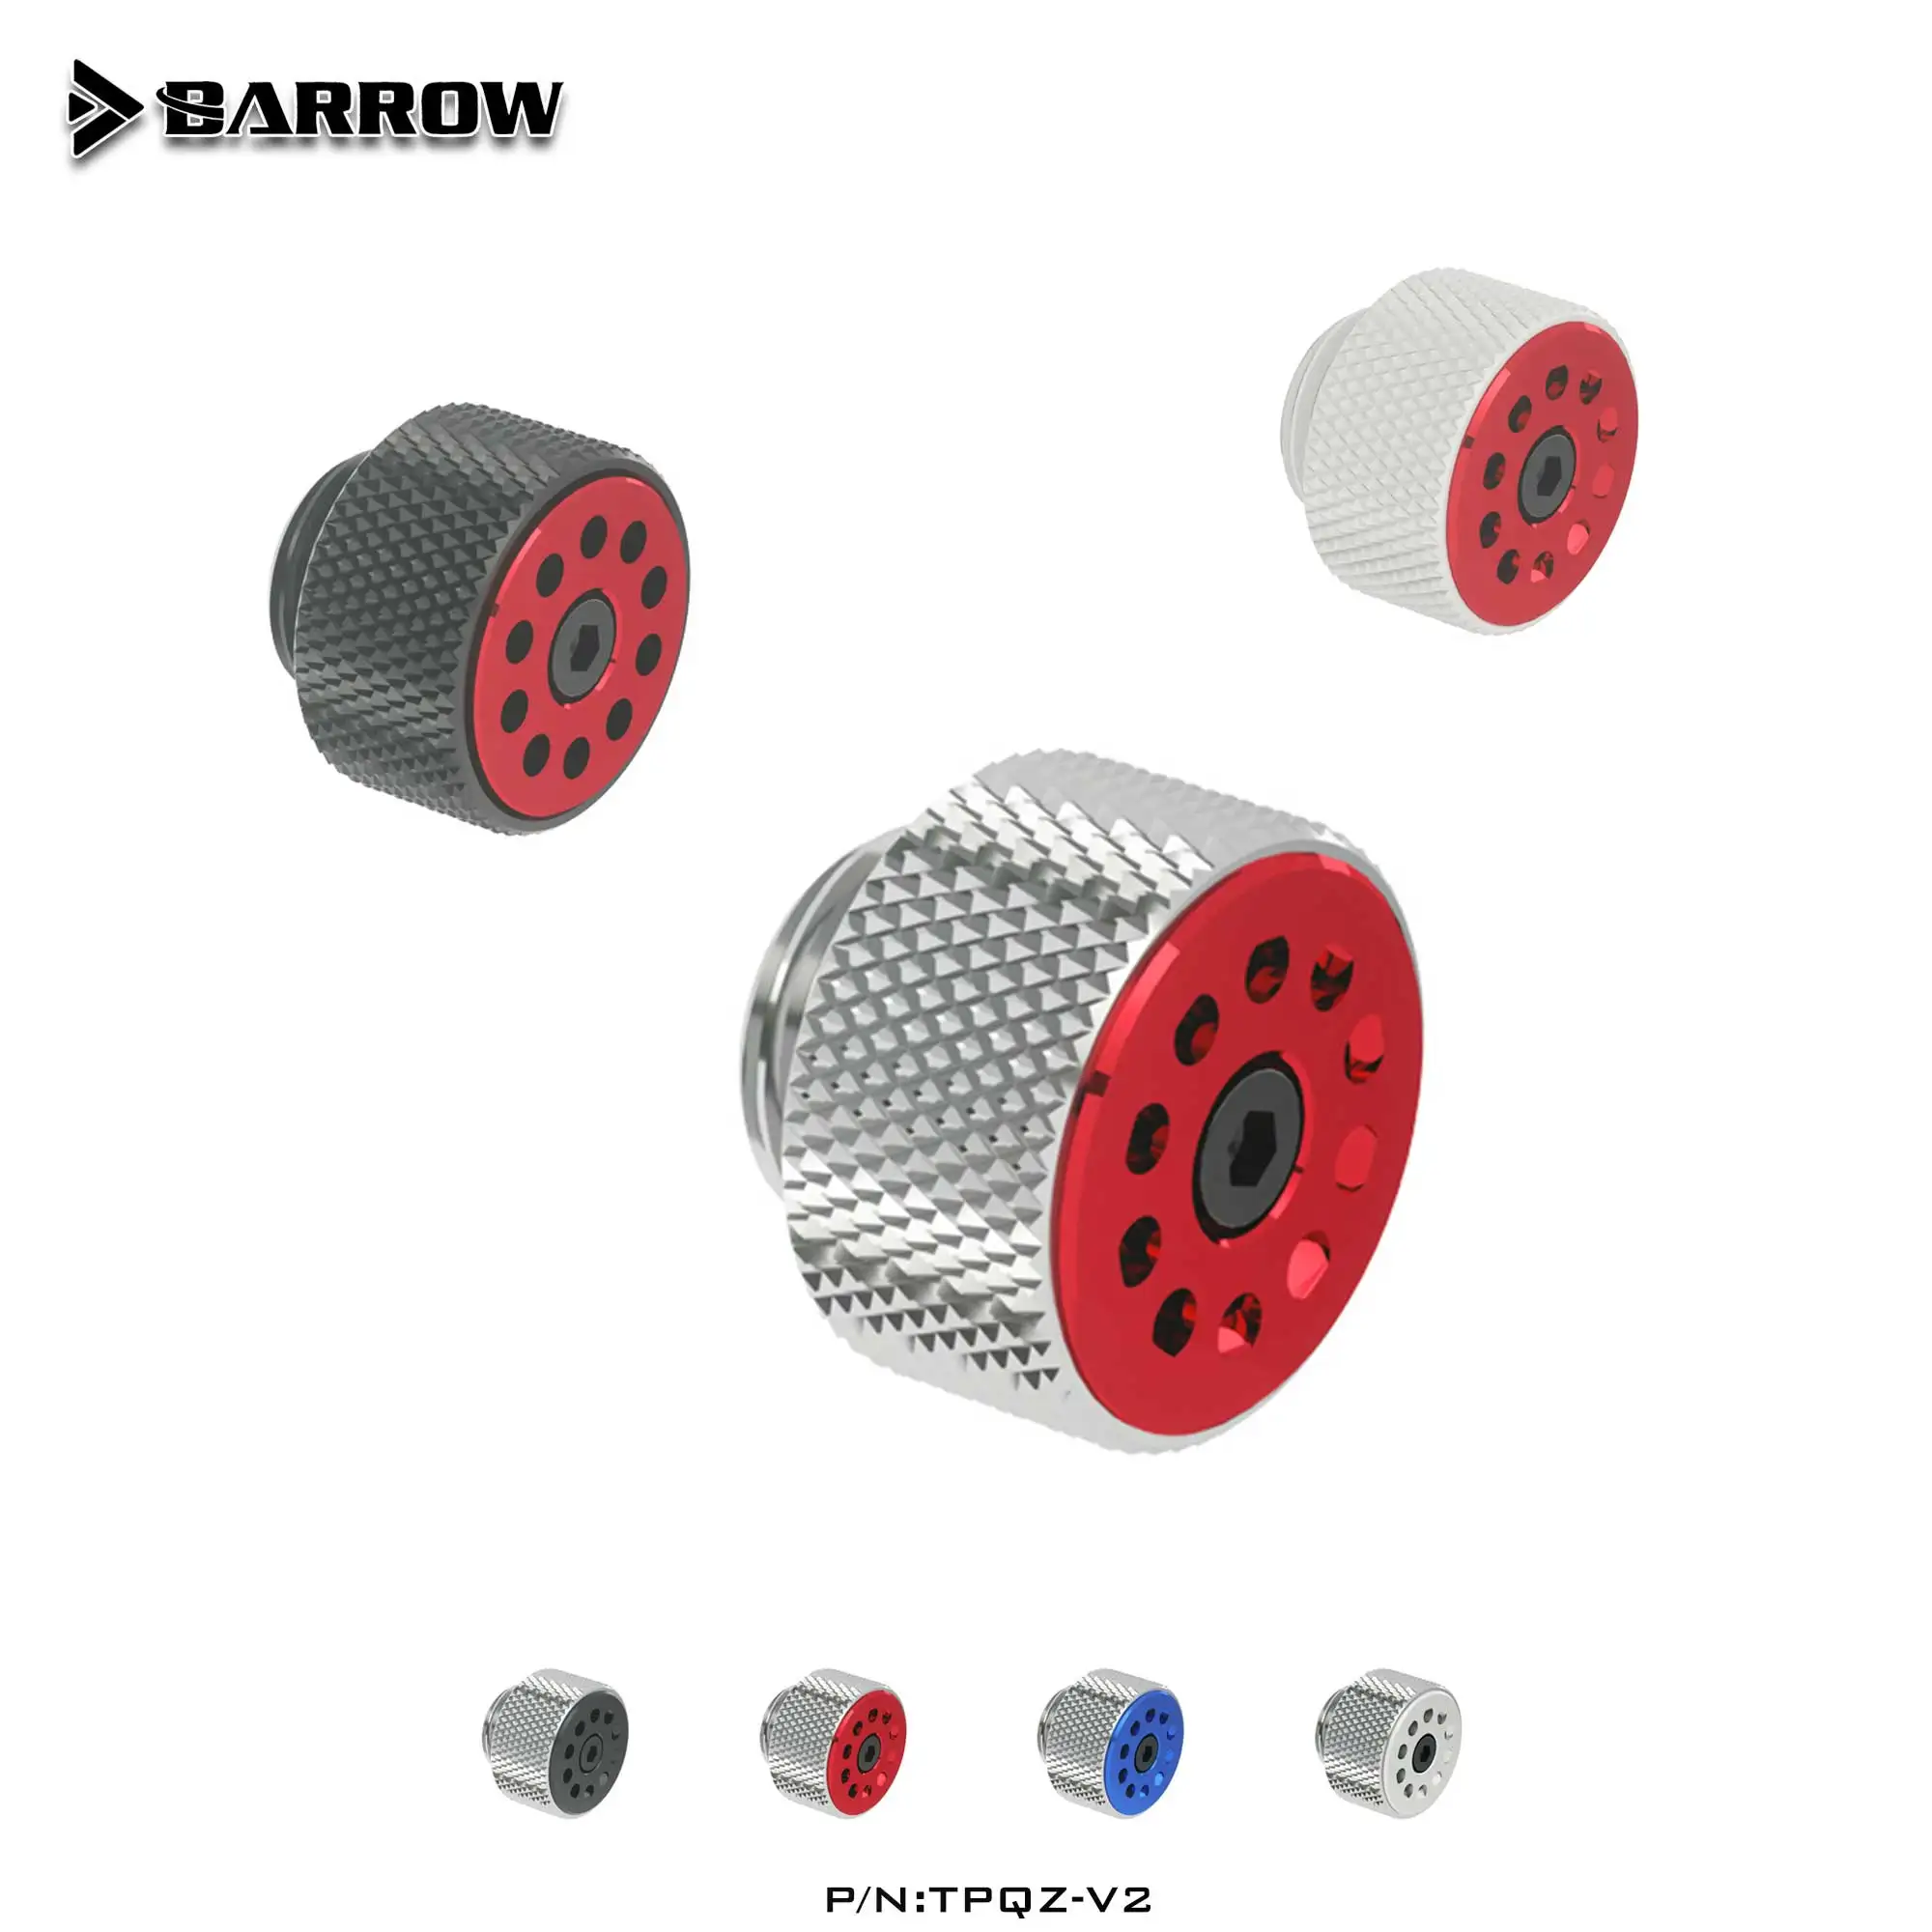 Barrow TPQZ-V2 Multi-color Air Evacuation Valve watercooler fitting g1/4 watercooling pc Silver/Black/White